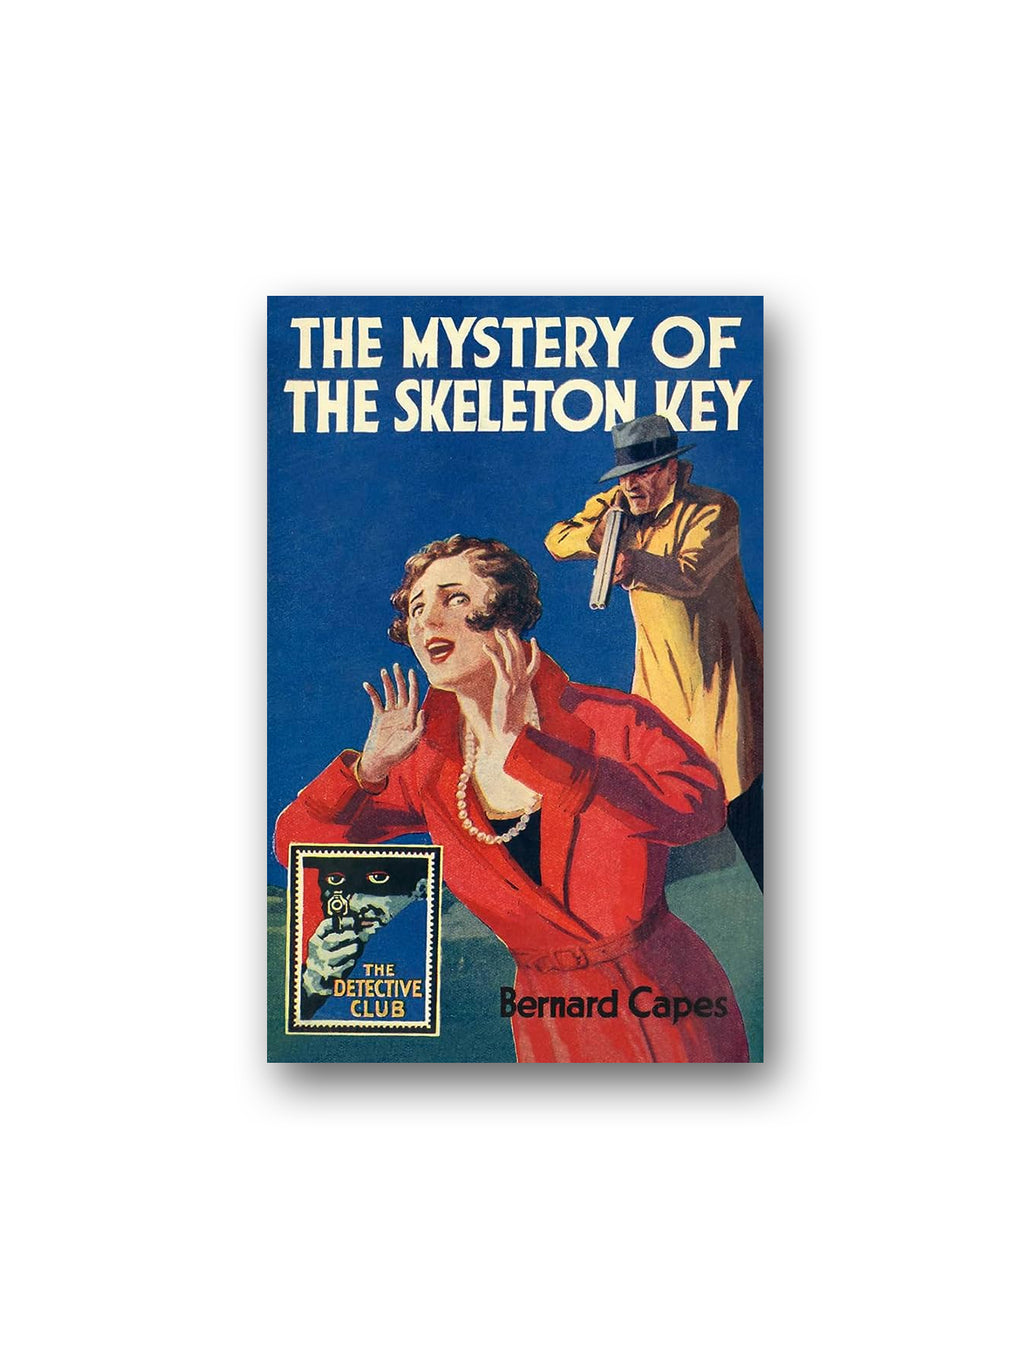 The Detective Club - The Mystery of the Skeleton Key